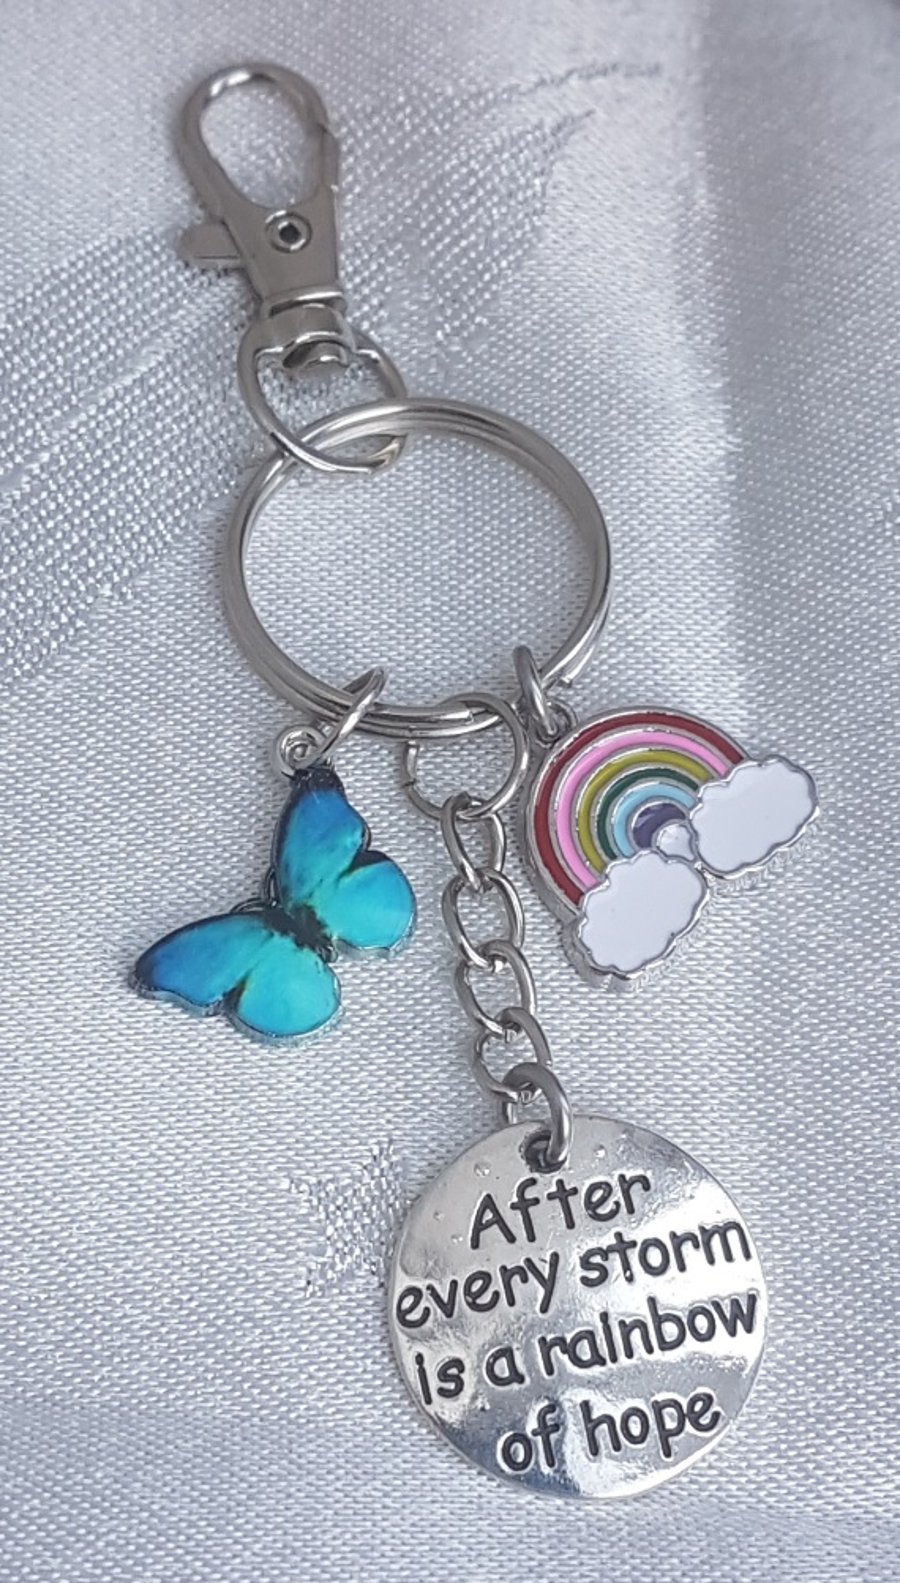 Gorgeous After Every Storm Key ring - Key Chain Bag Charm.